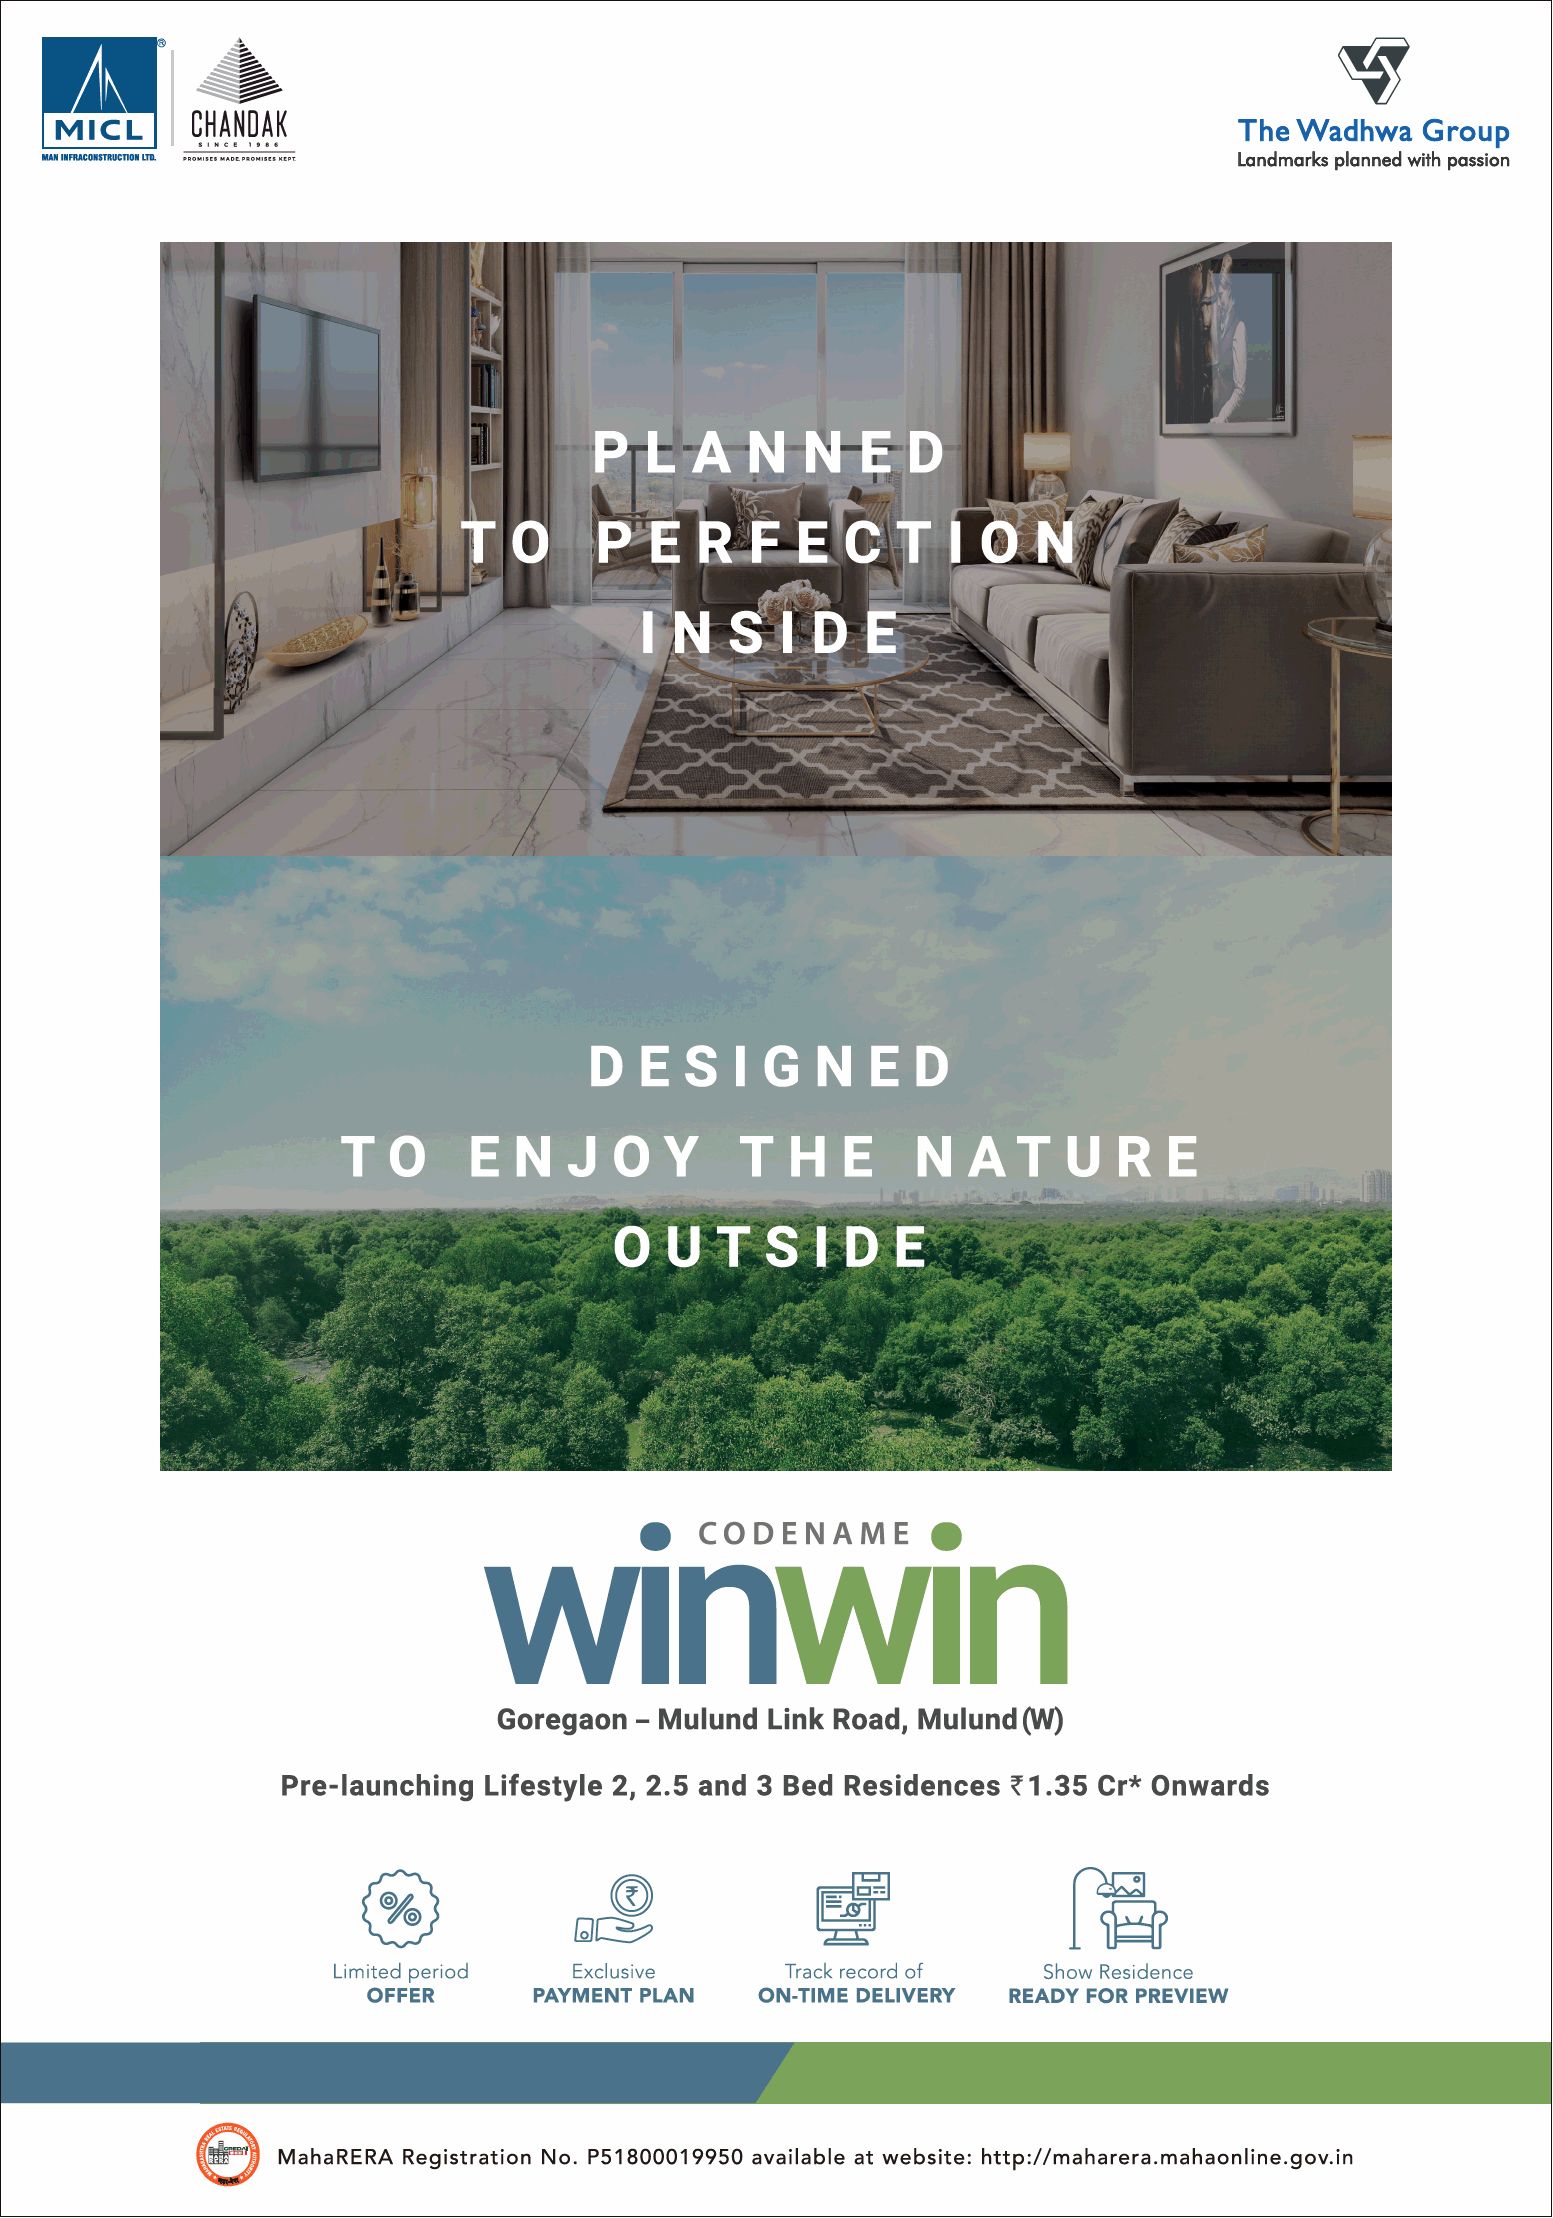 Pre-launching lifestyle 2, 2.5 and 3 bed residences Rs 1.35 Cr at Wadhwa Codename Win Win, Mumbai